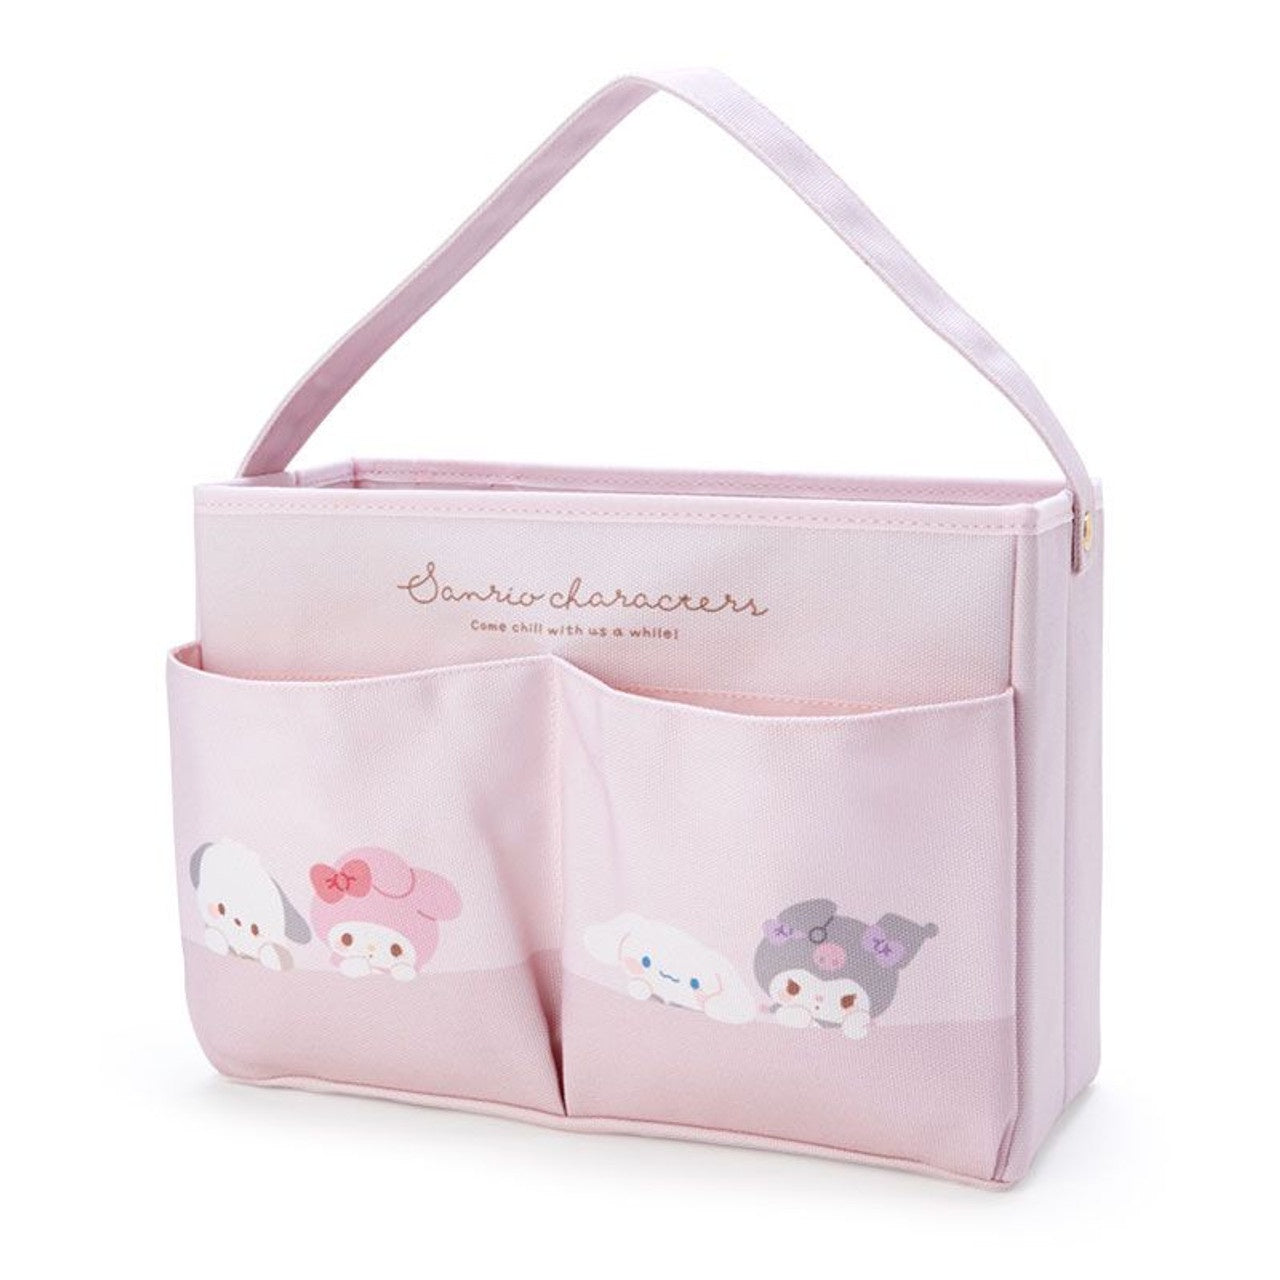 Sanrio Storage Box Chill Time Character Mix